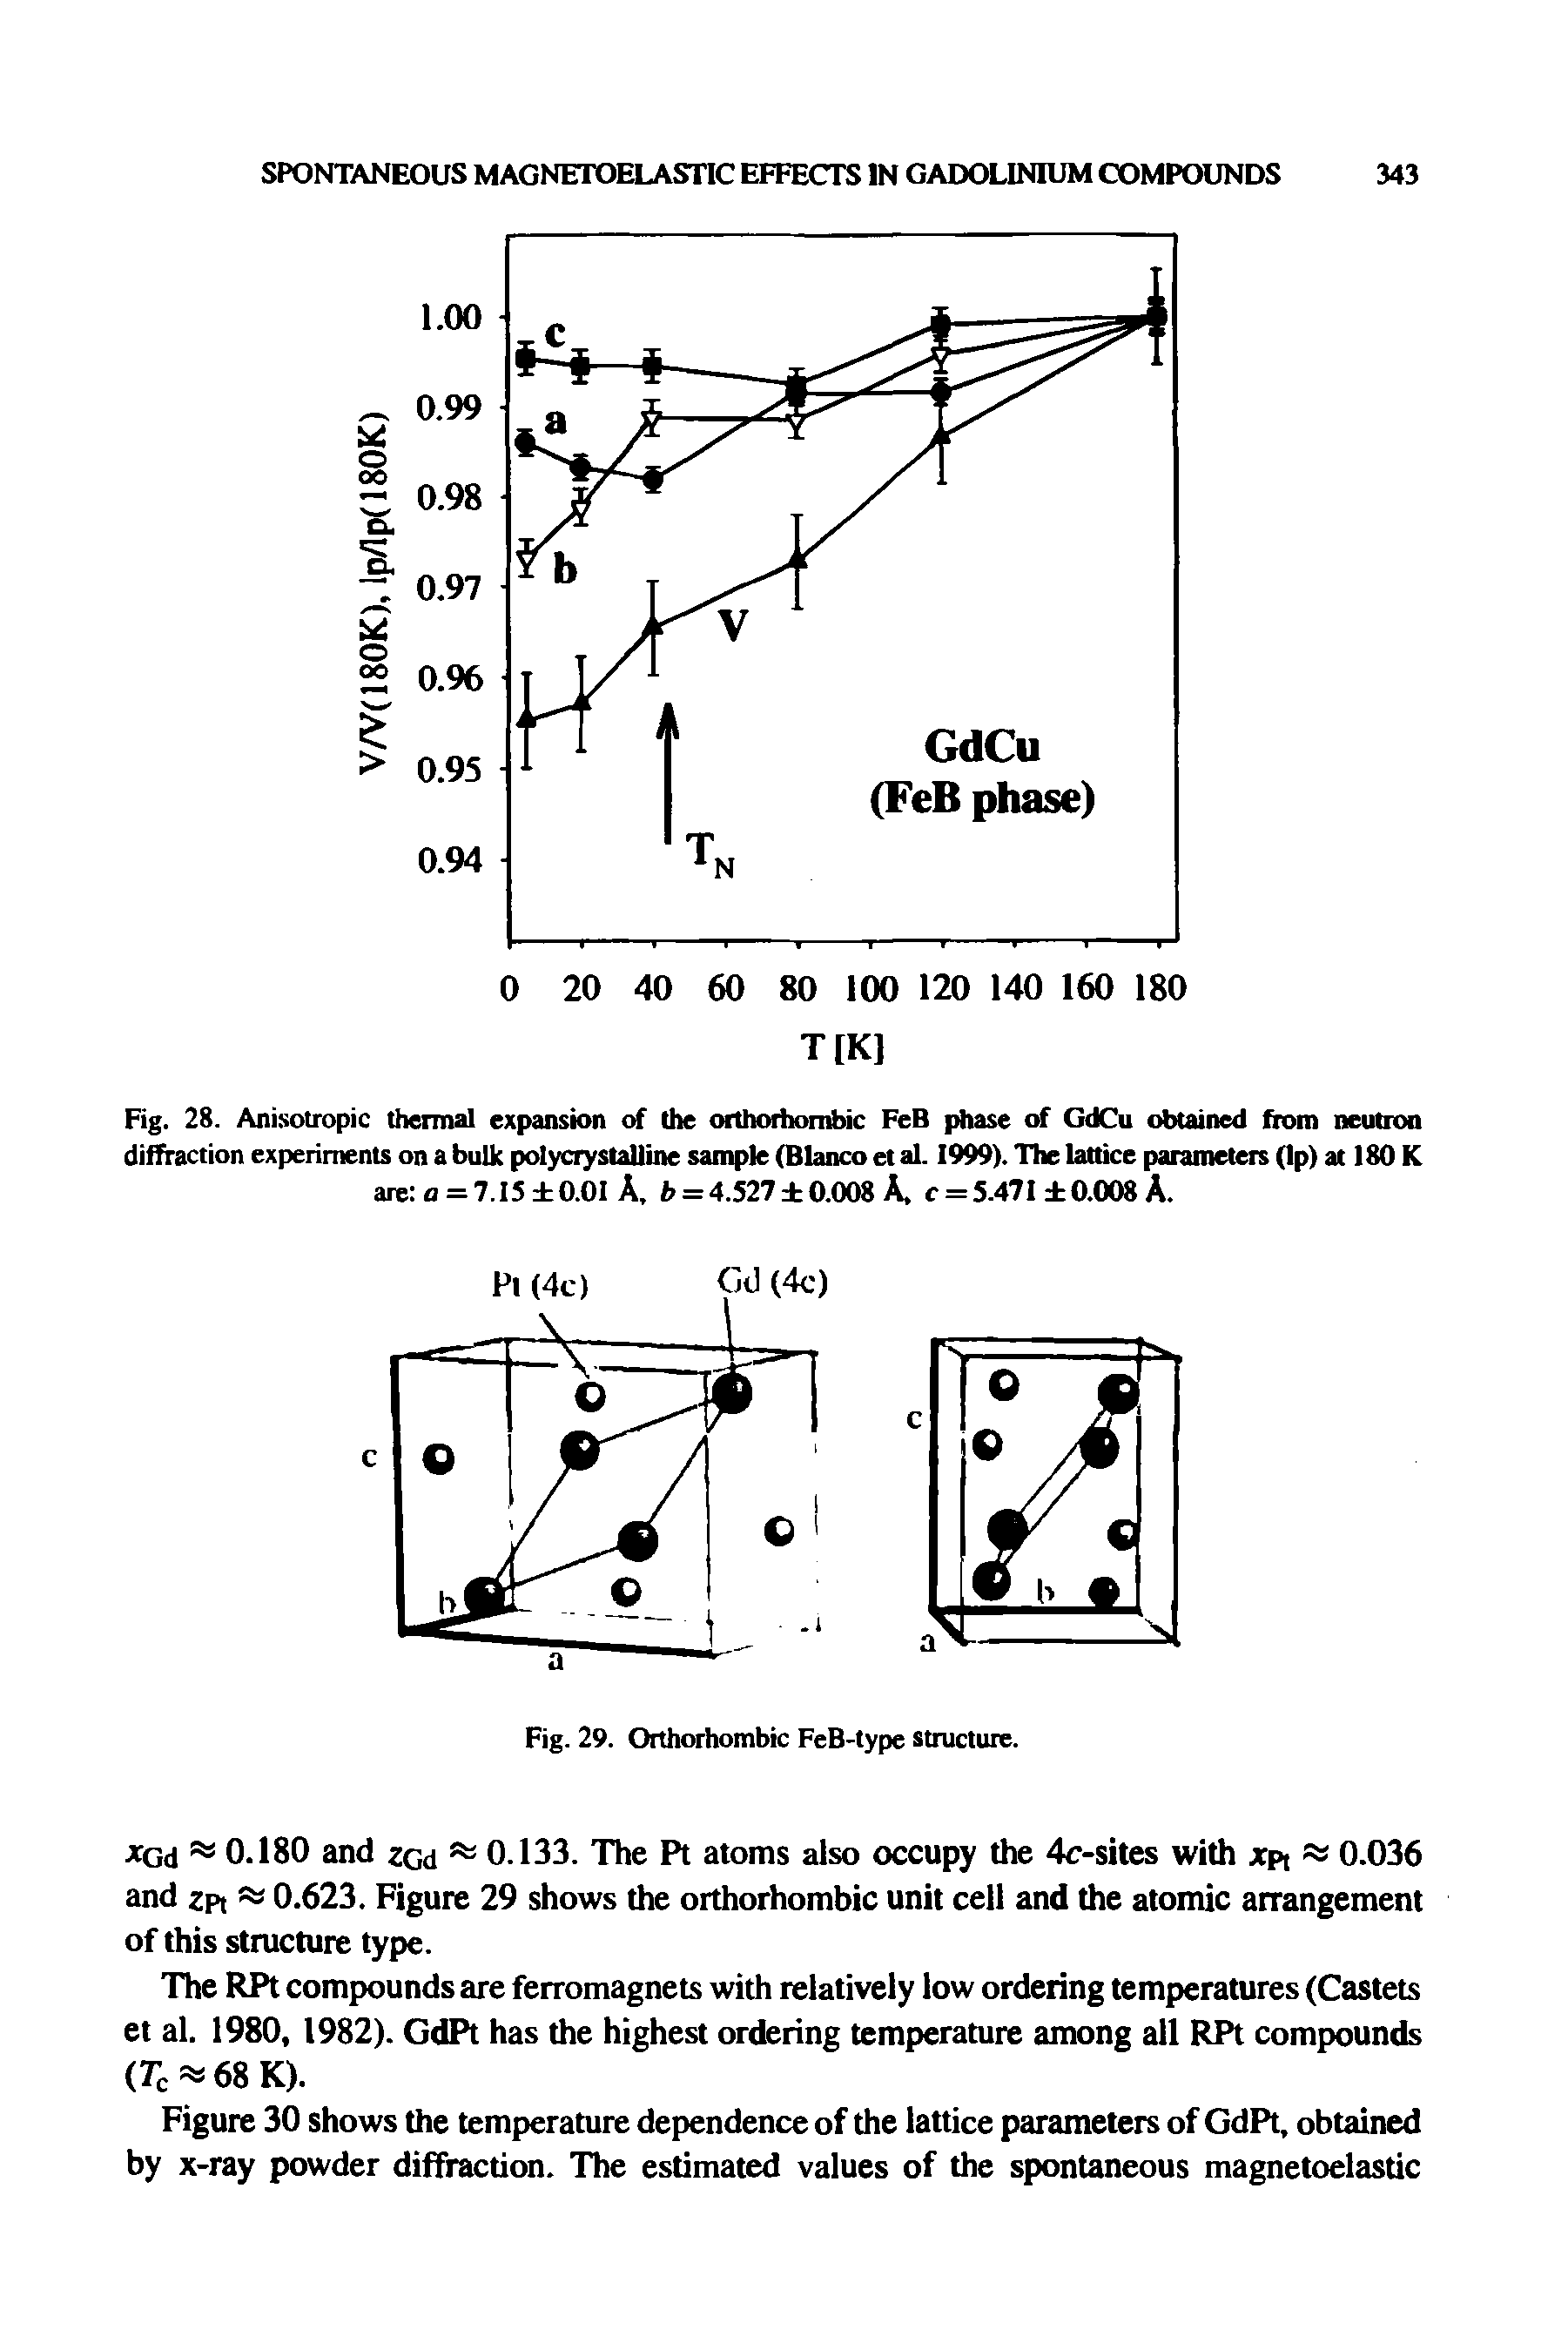 Fig. 28. Anisotropic thermal expansion of the orthorhombic FeB phase of GdCu obtained from neutron diffraction experiments on a bulk polycrystalline sample (Blanco et al. 1999). The lattice parameters (Ip) at 180 K are o = 7.I5 0.01 A, b = 4.527 0.008 A, c = 5.471 0.008 A.